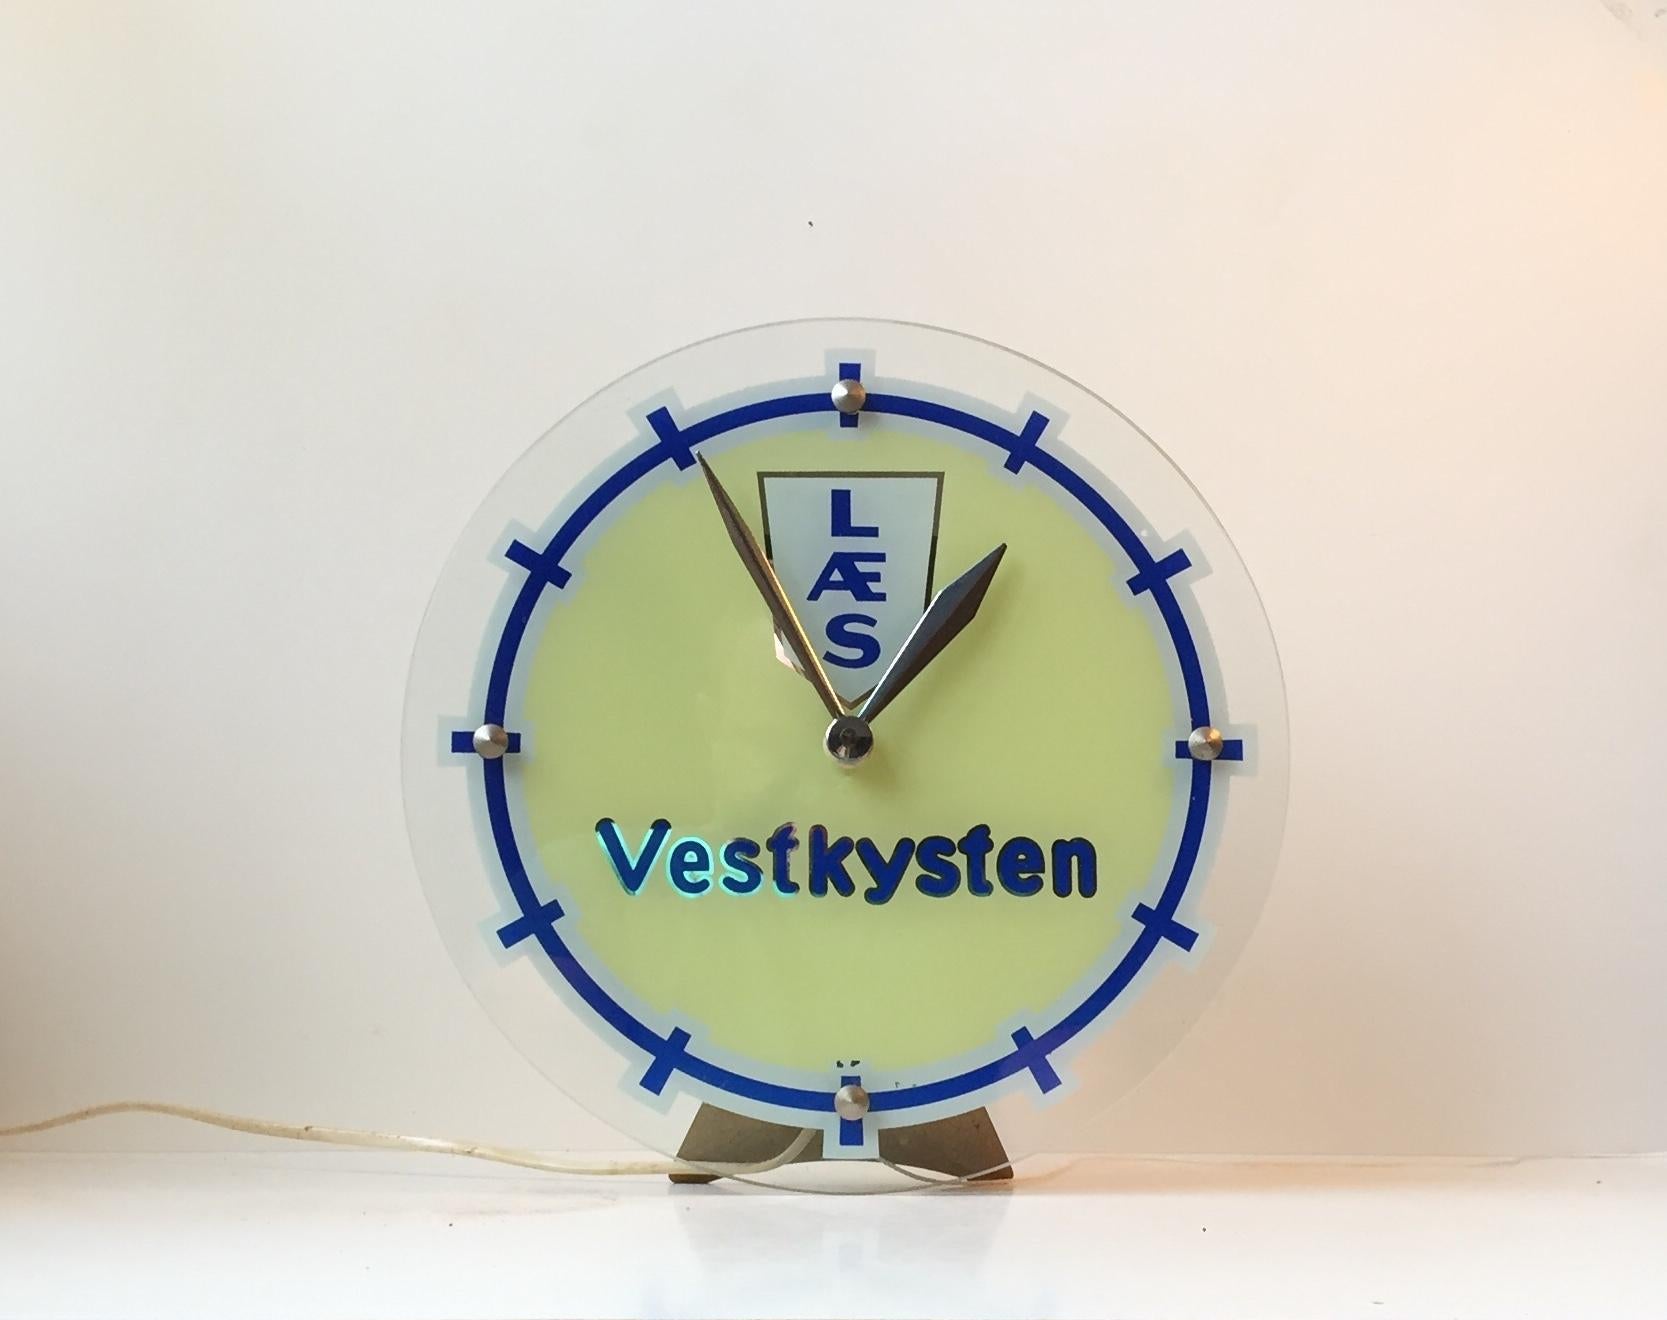 - Illuminated electrical wall or table clock manufactured by Halux in Flensburg, Germany
- It was for the Danish newspaper Jyske Vestkysten
- Only 8 examples were made for the newspaper's administrations and offices
- The blue and yellow clock